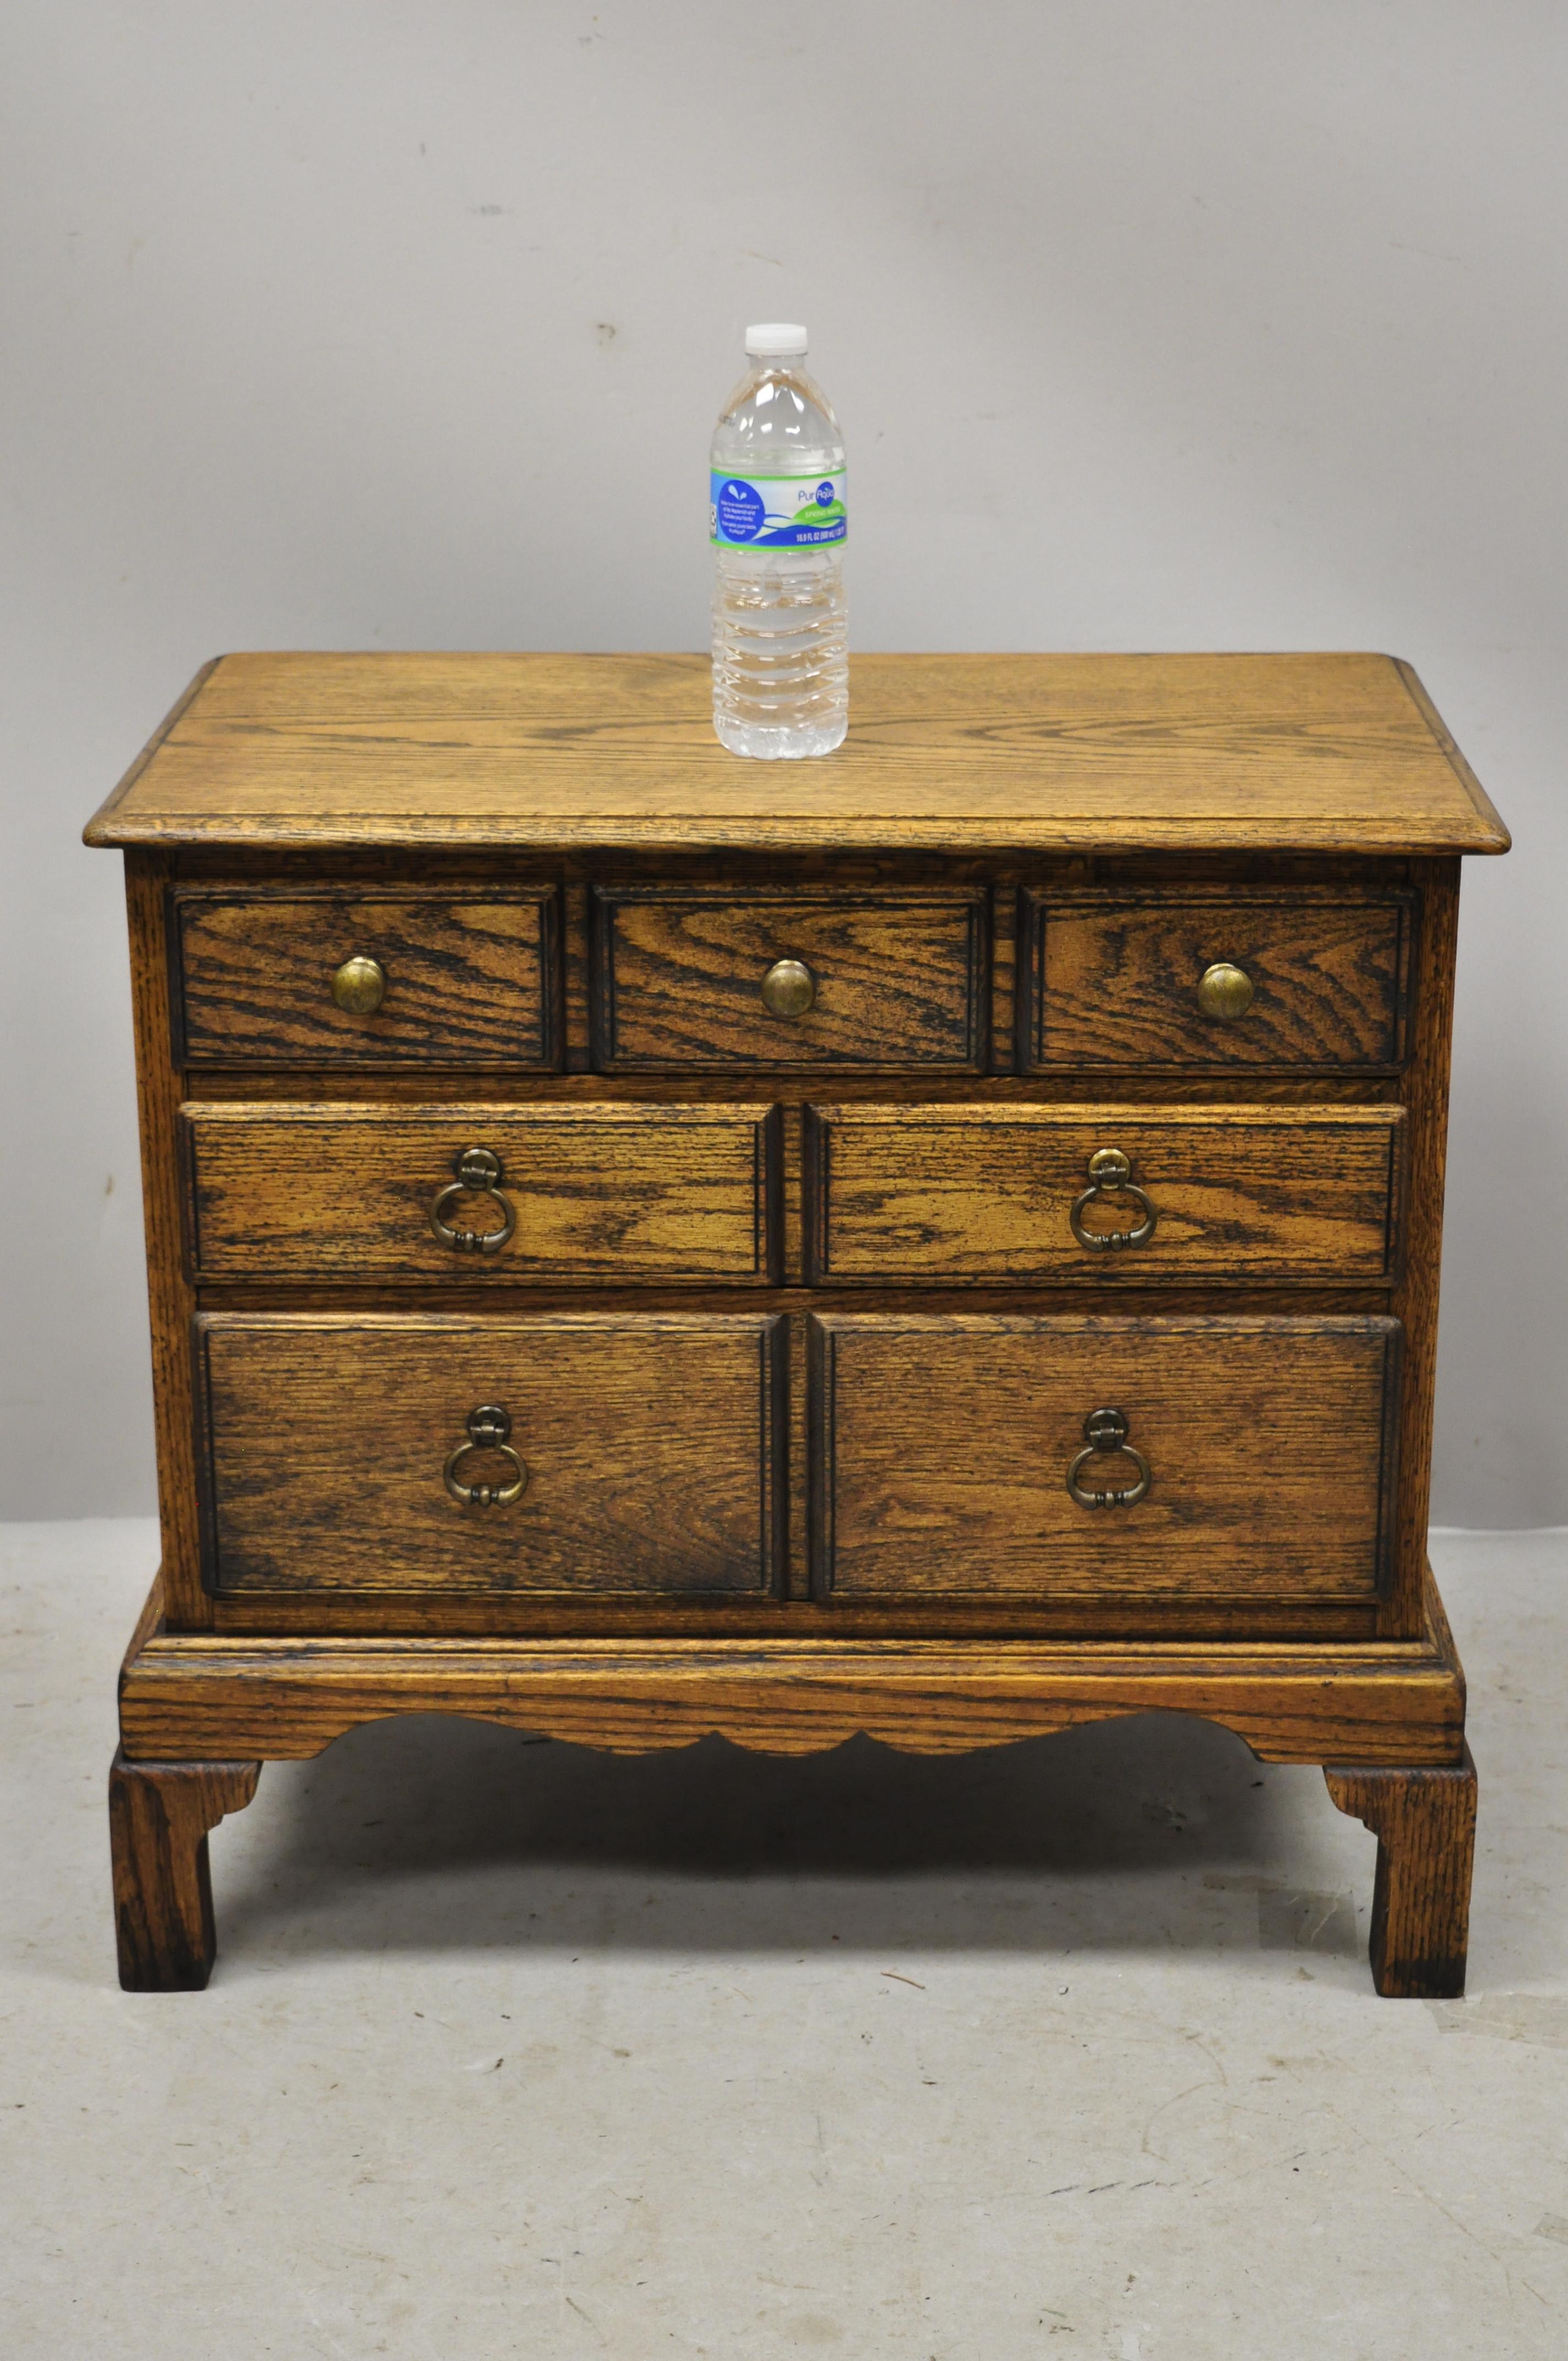 Vintage English Colonial Style Small Miniature Oak Wood Campaign Chest Side Table. Item features solid wood construction, beautiful wood grain, 3 dovetailed drawers, solid brass hardware, quality American craftsmanship. Circa Mid 20th Century.